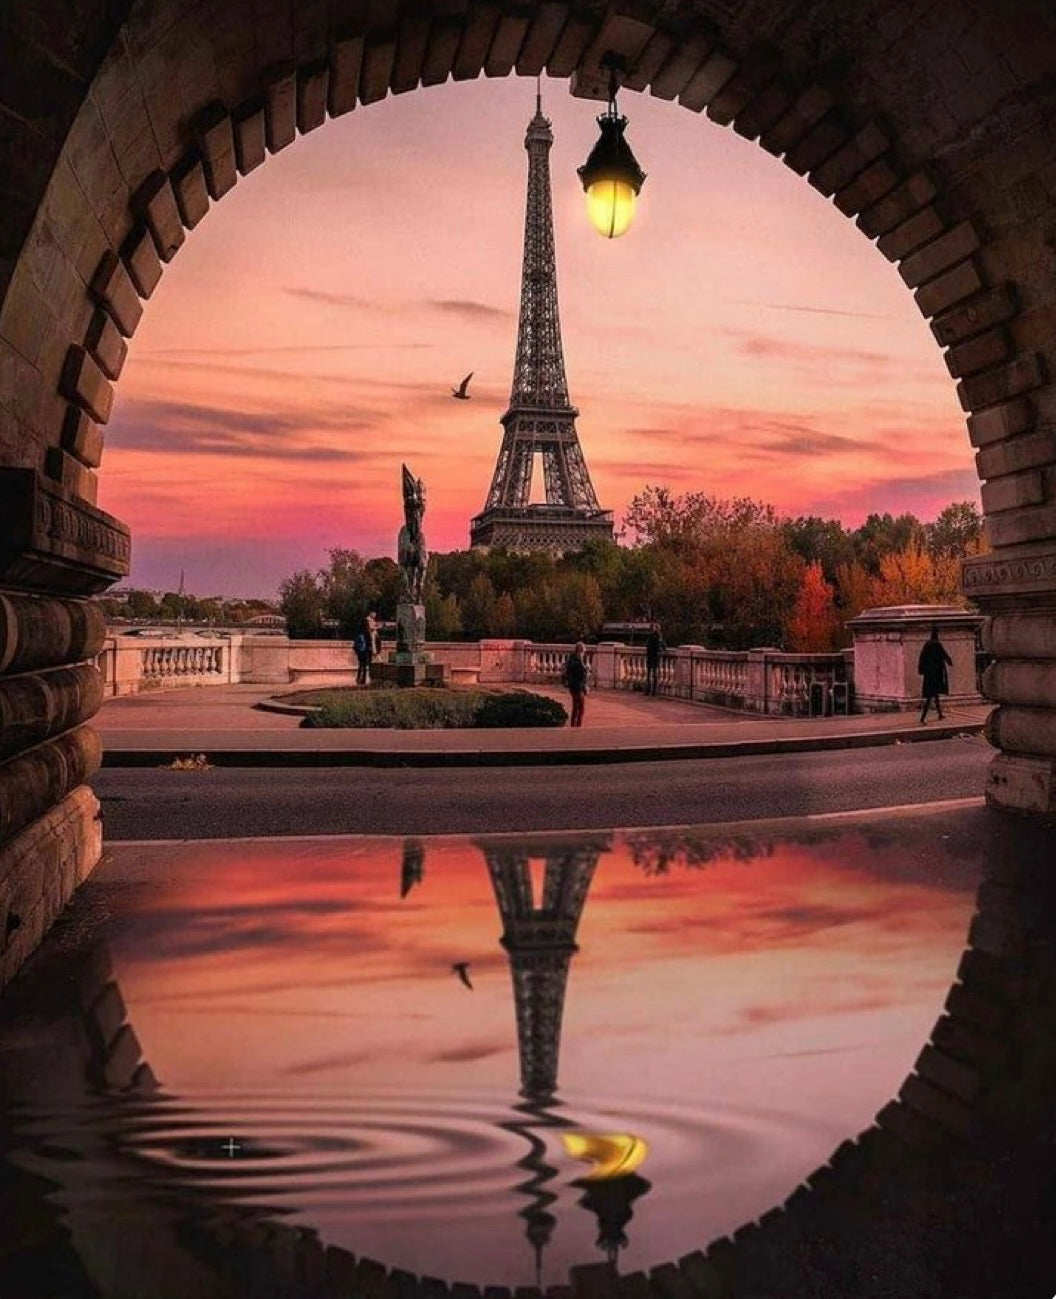 The Eiffel Tower framed beautifully and with a perfect water reflection.